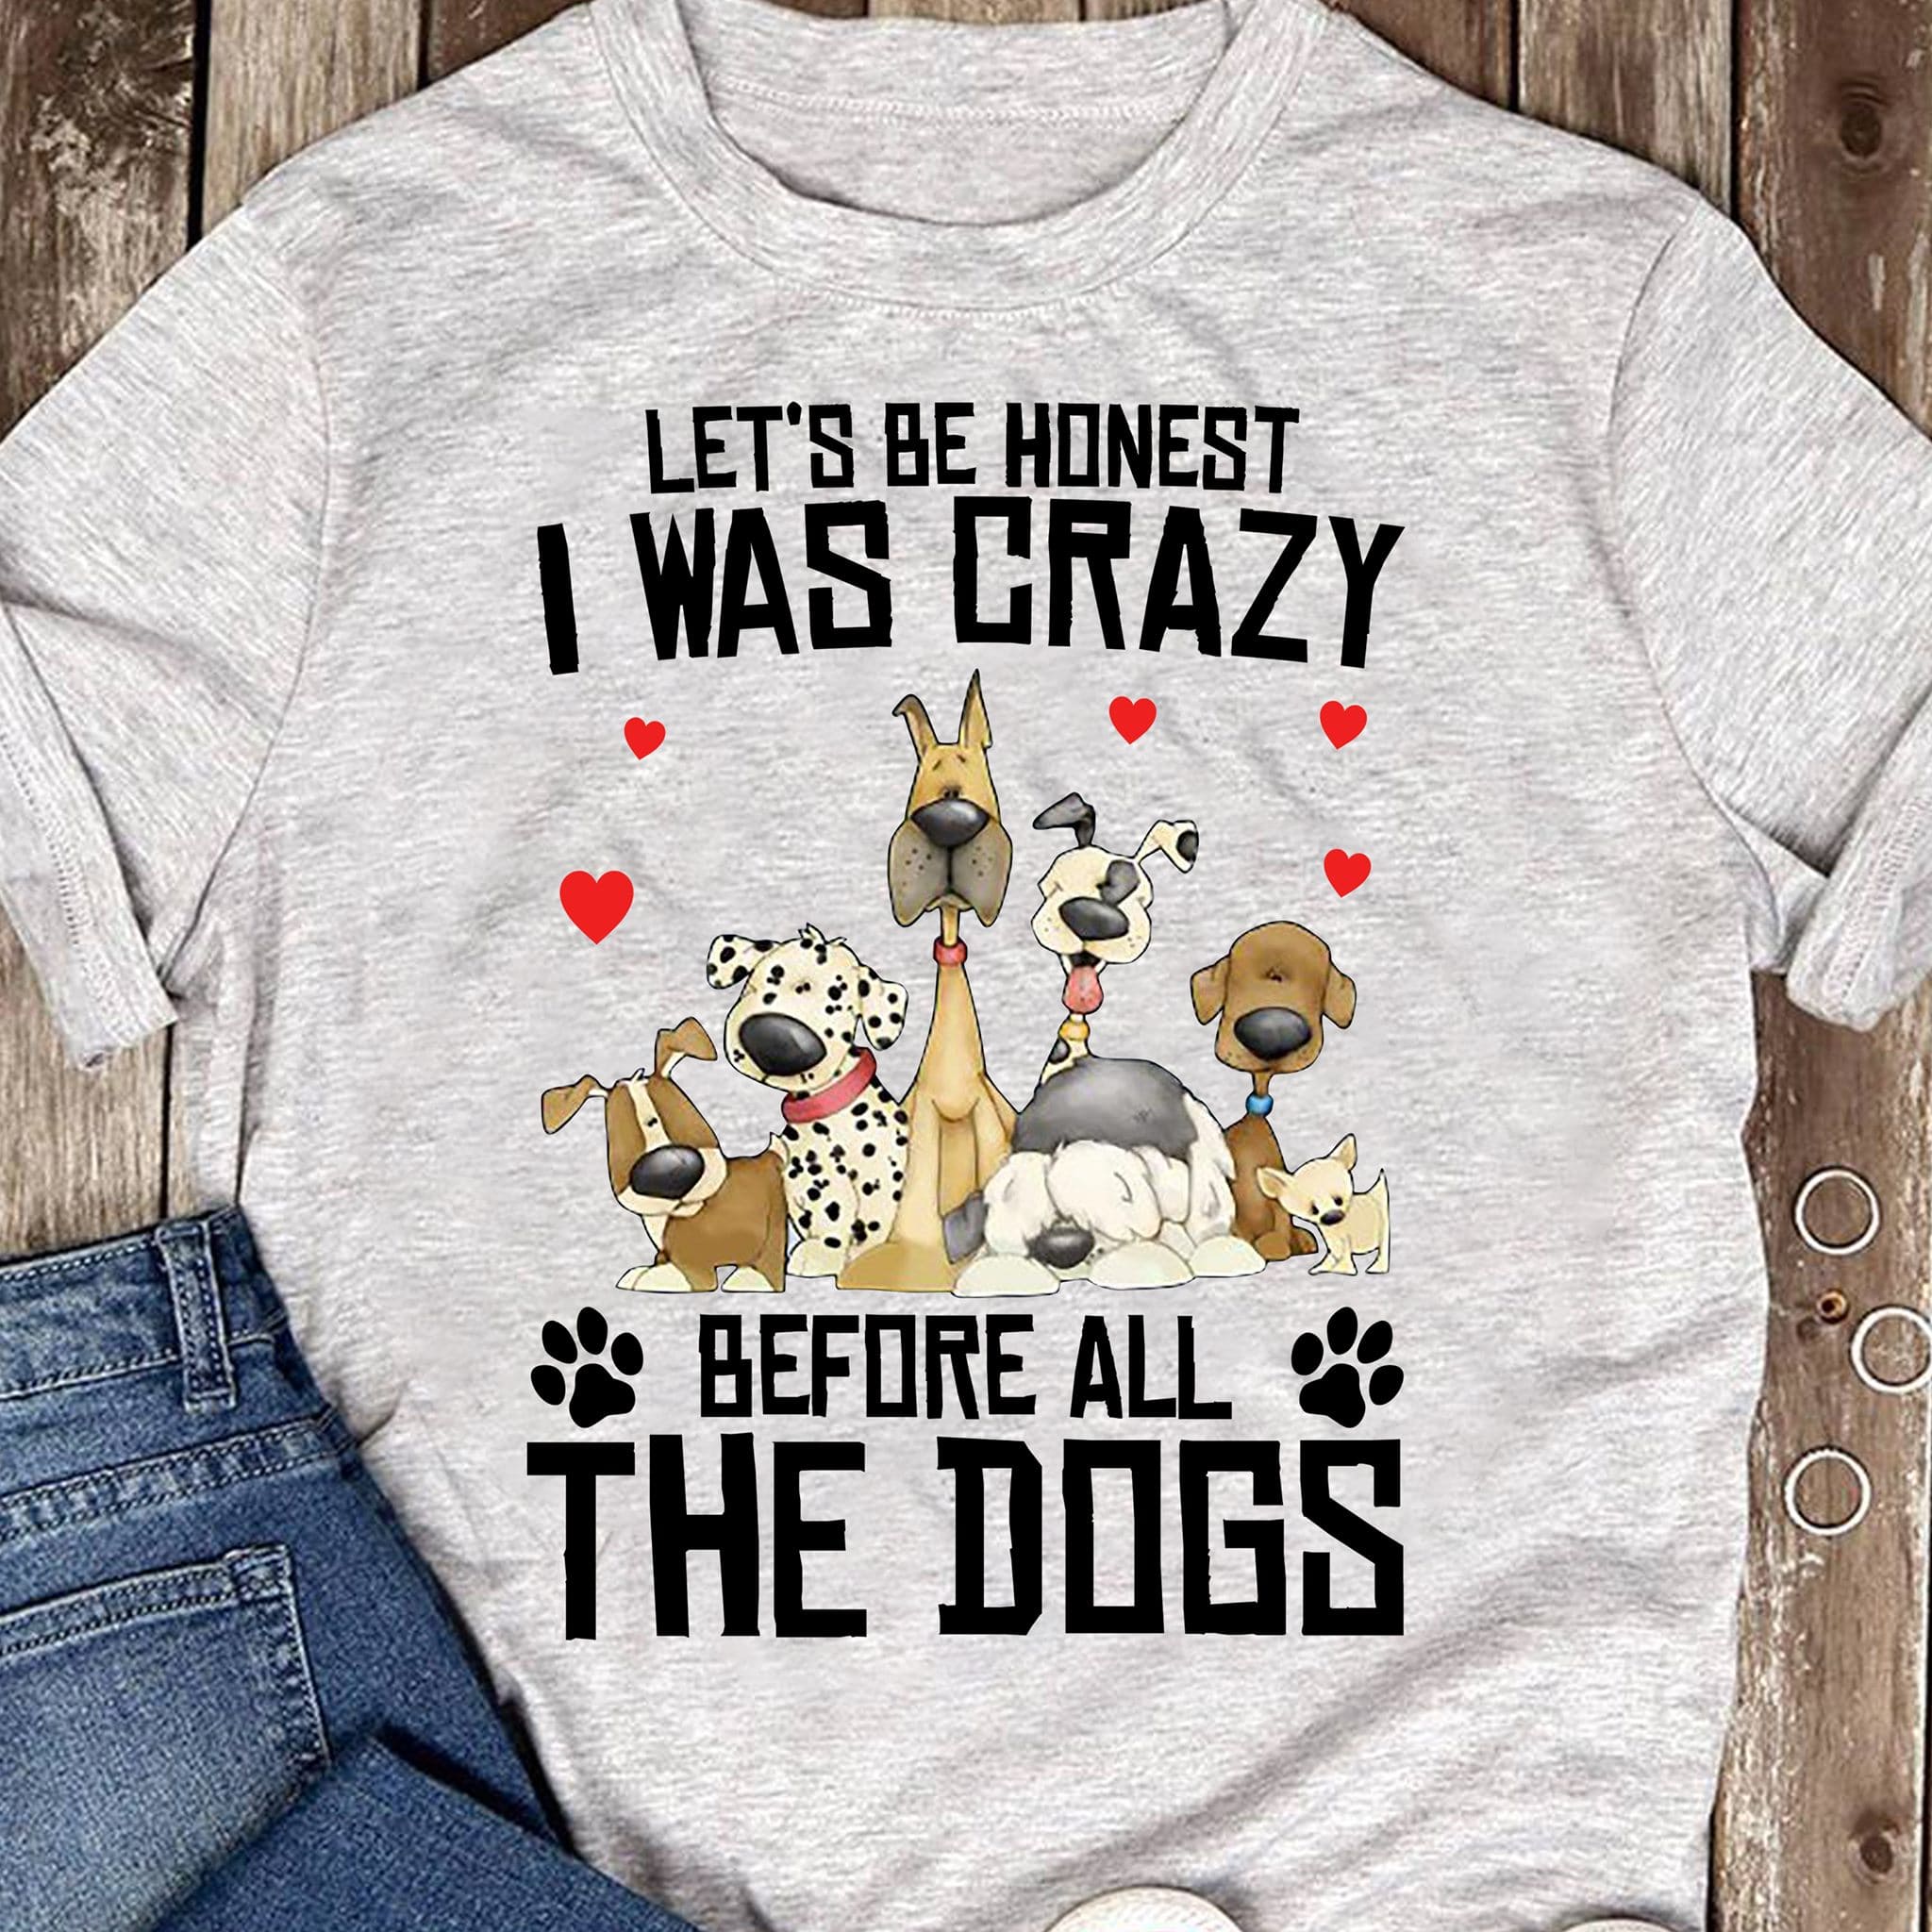 Let's be honest I was crazy before all the dogs - T-shirt for dog people, dog graphic T-shirt